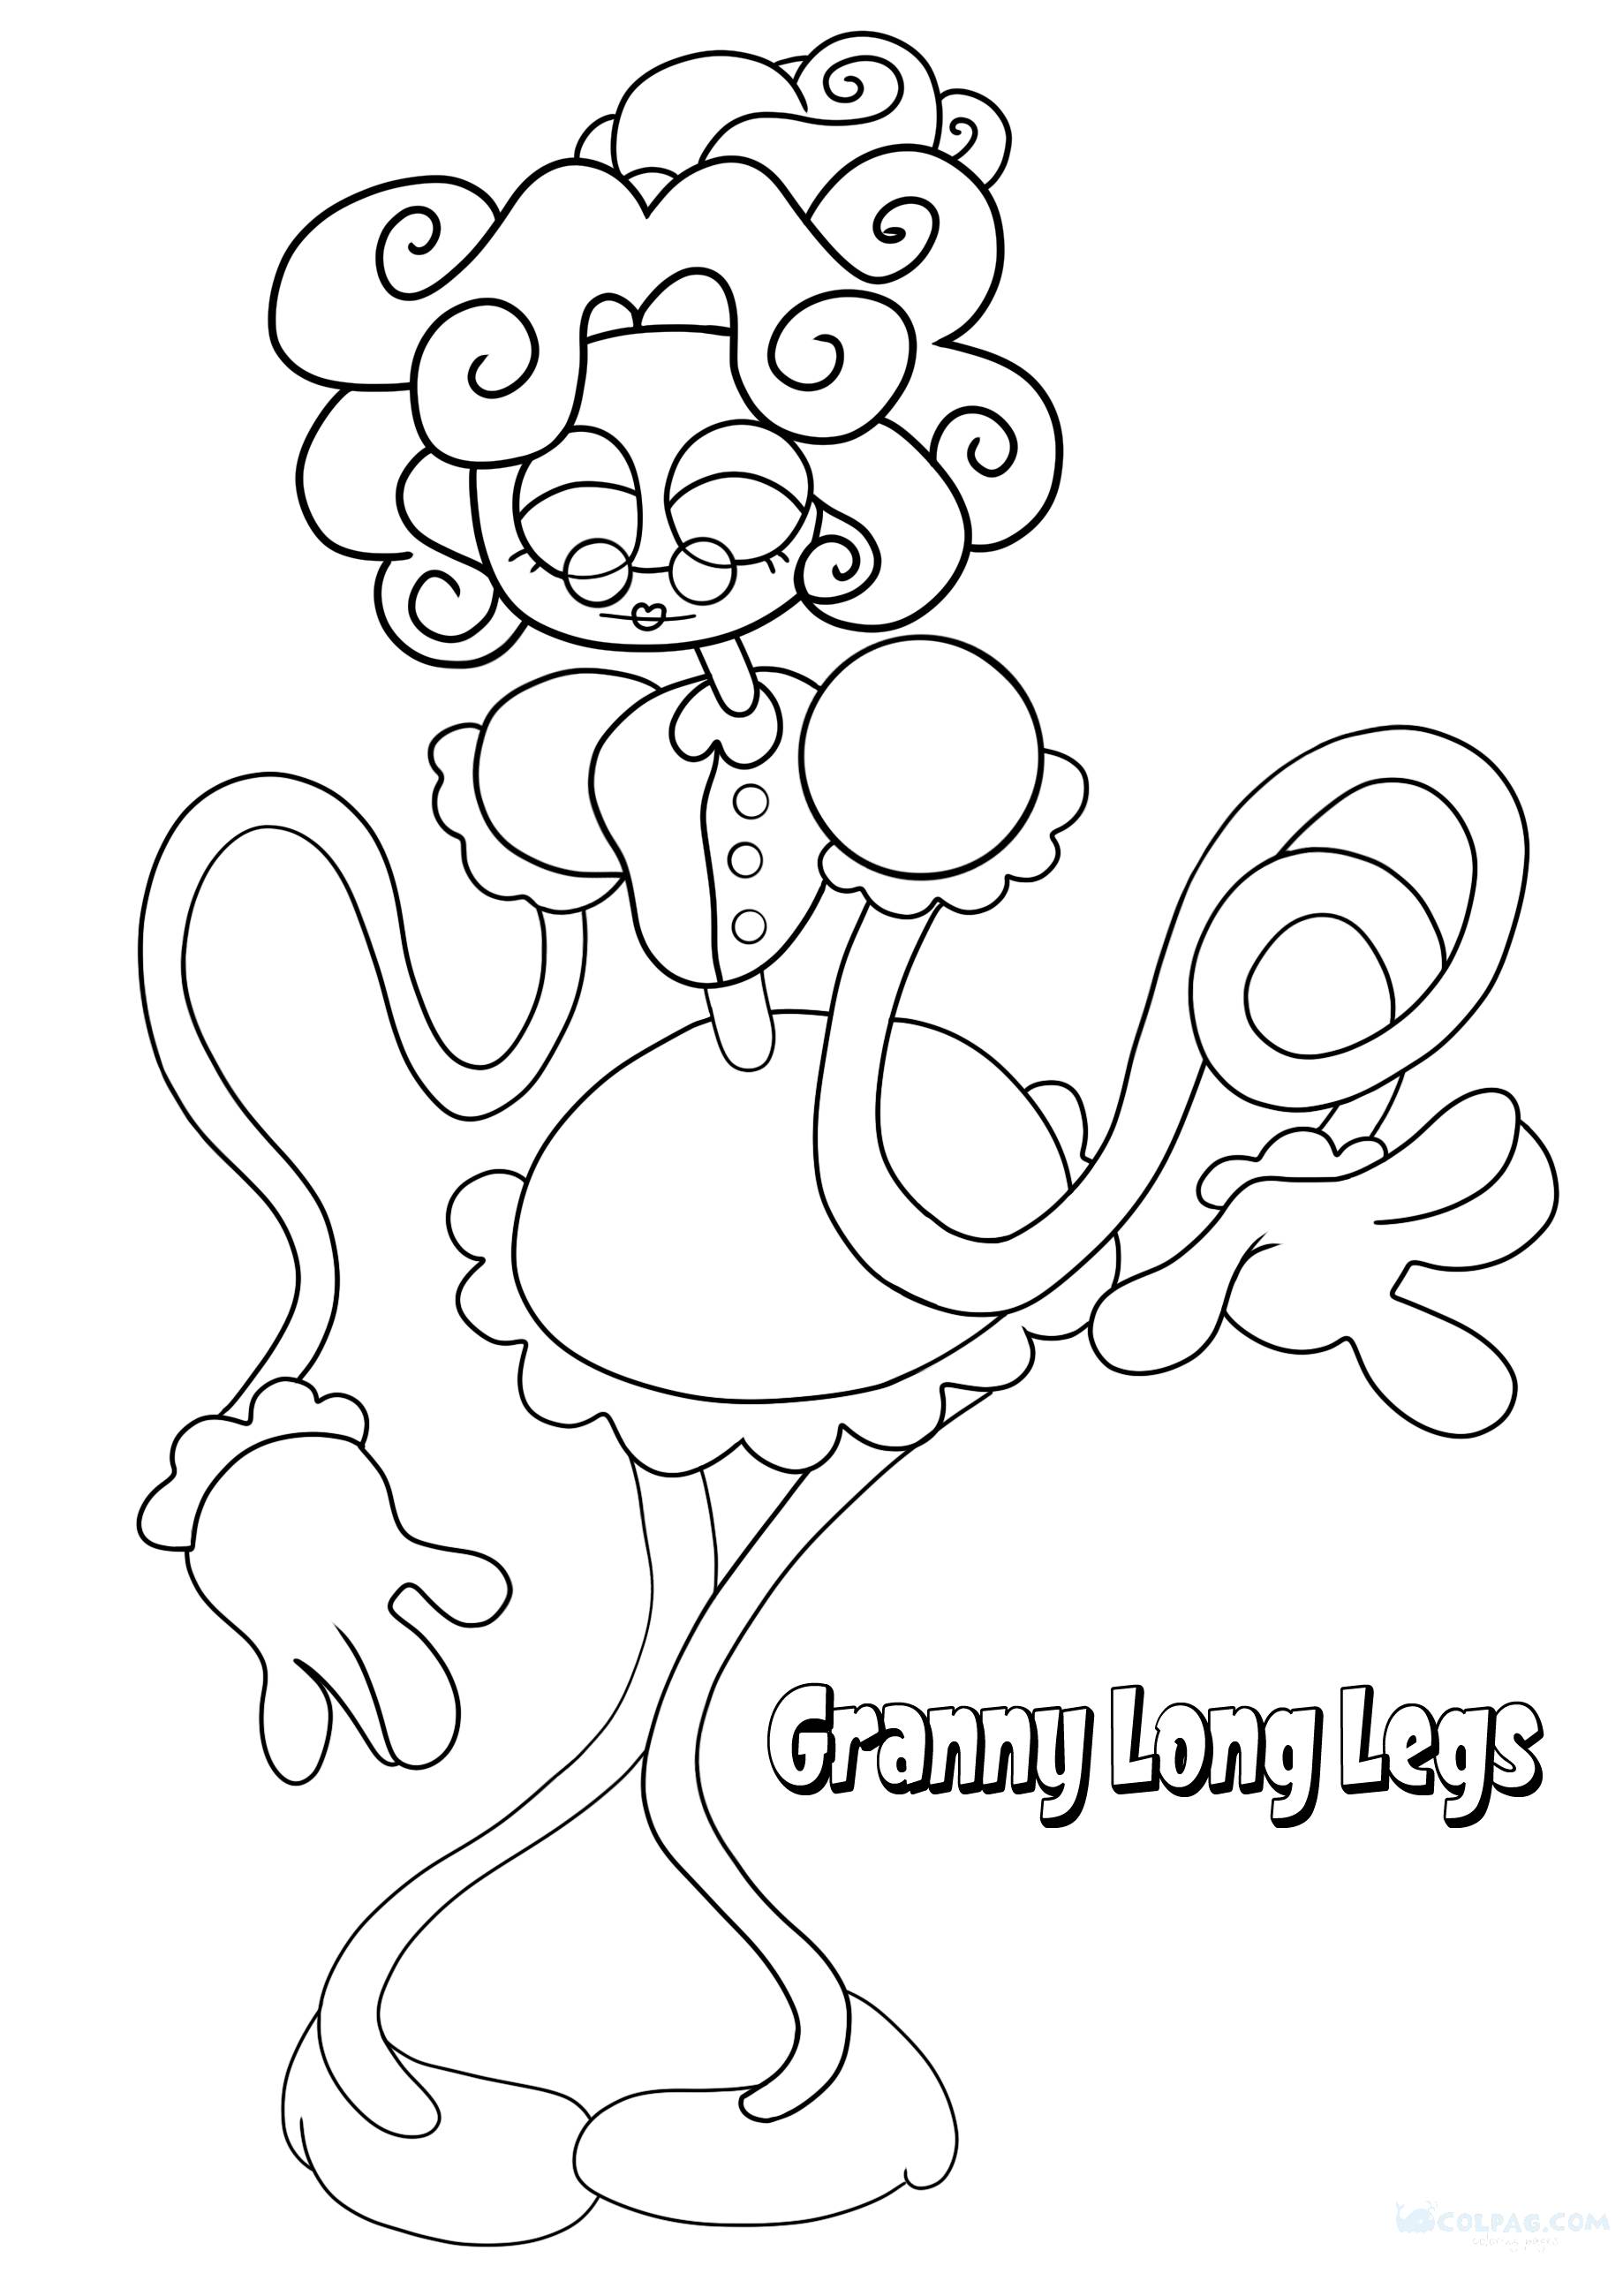 granny-long-legs-coloring-page-colpag-com-3